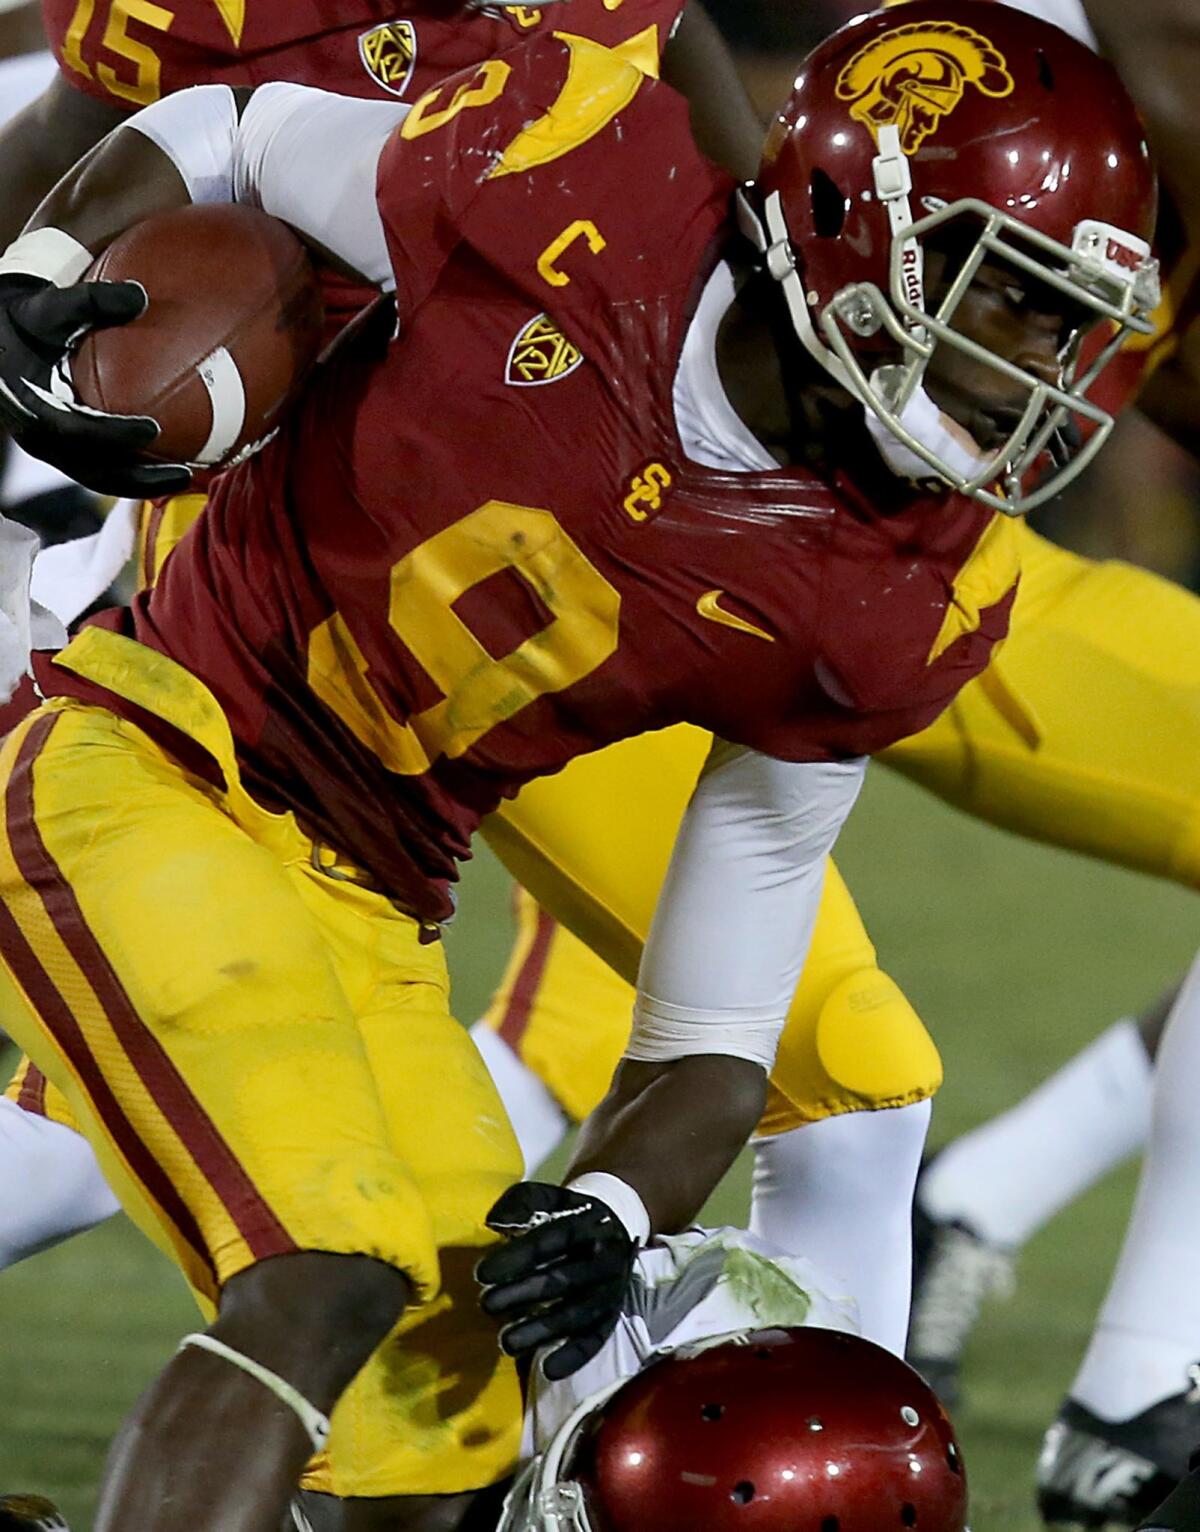 USC wide receiver Marqise Lee runs against Washington State at the Coliseum in Los Angeles.